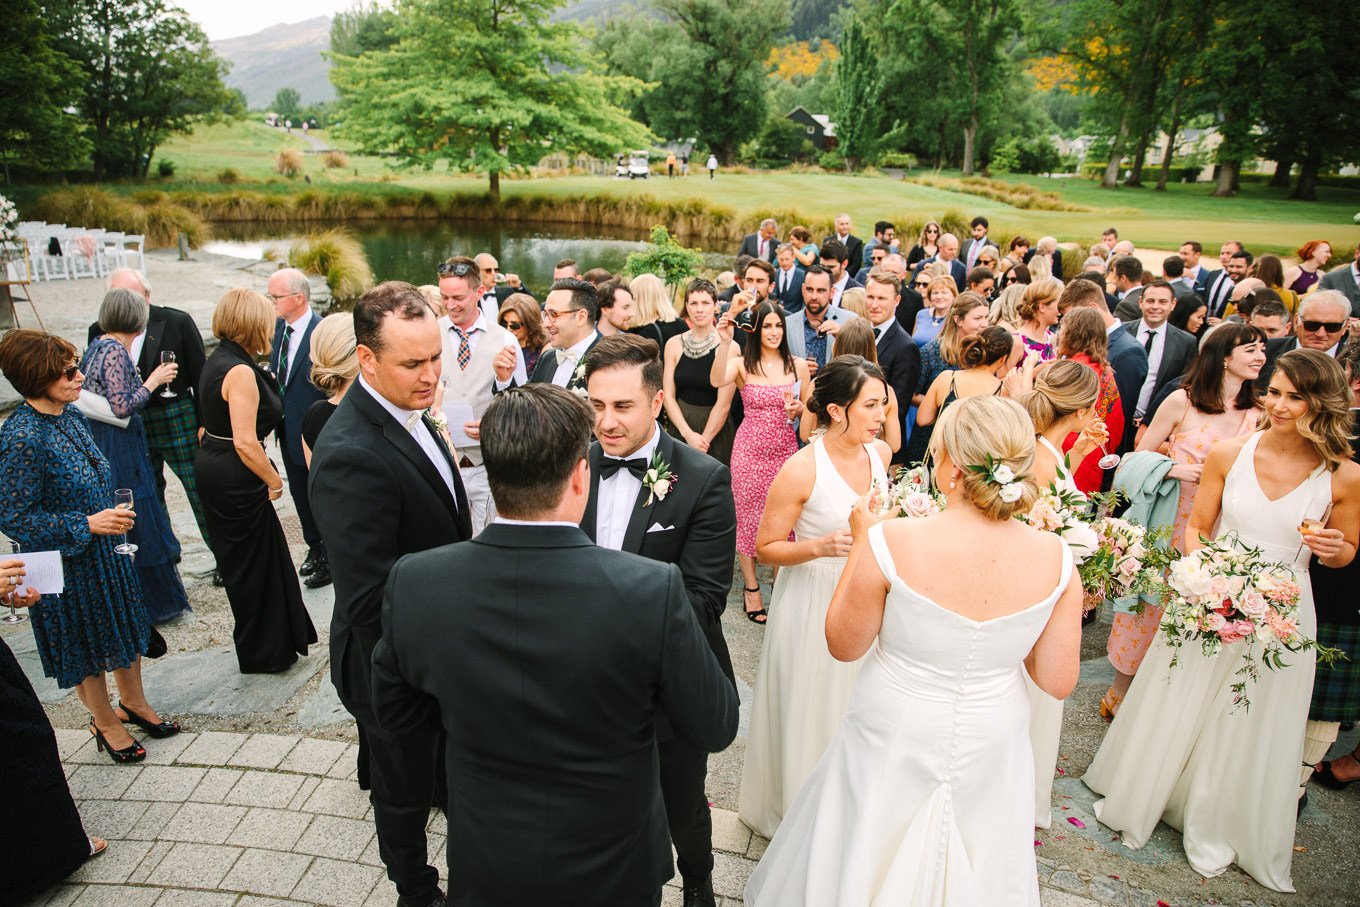 Canapes and greetings. Millbrook Resort Queenstown New Zealand wedding by Mary Costa Photography | www.marycostaweddings.com